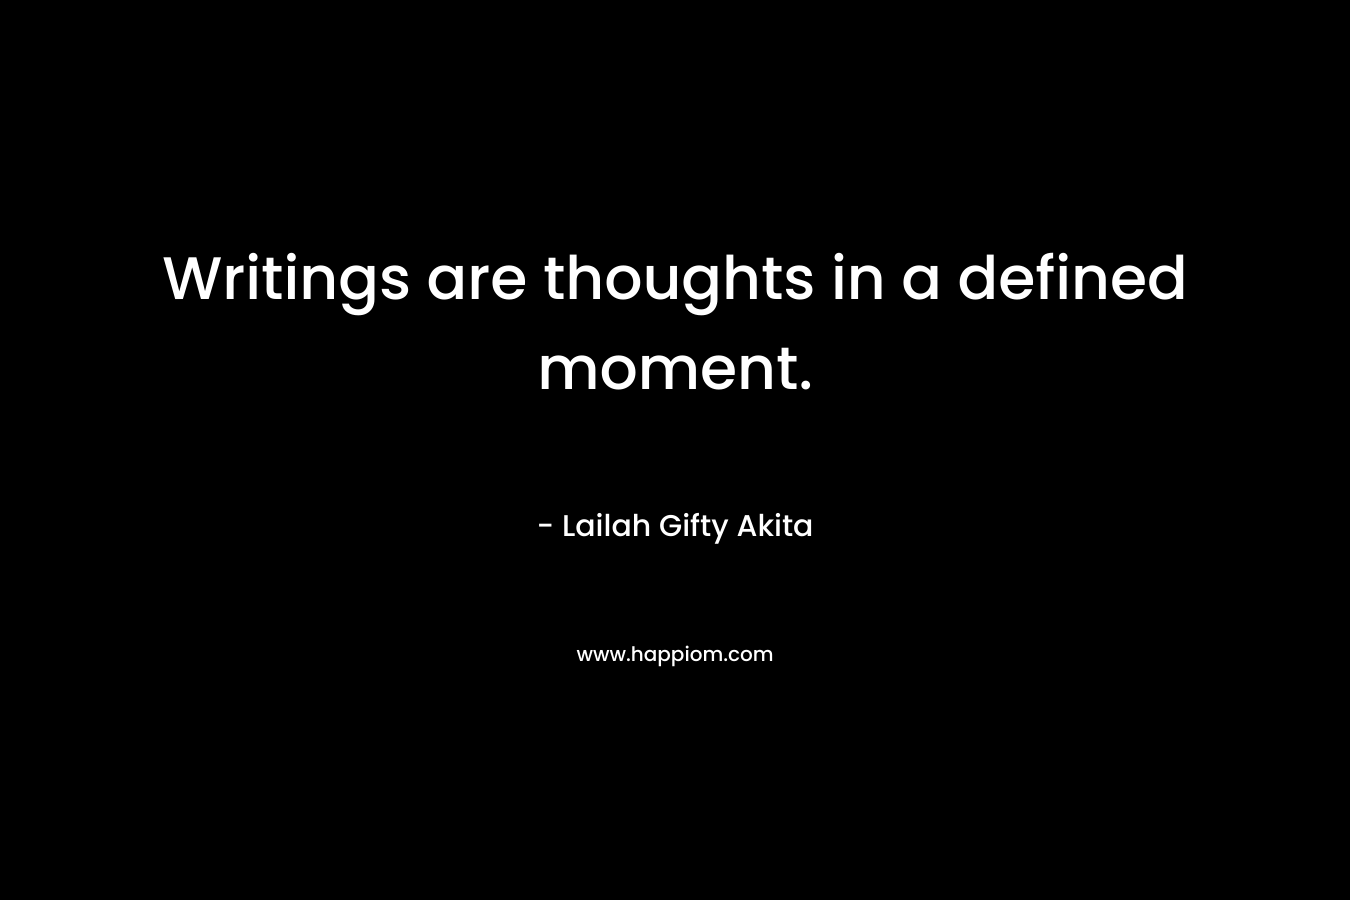 Writings are thoughts in a defined moment. – Lailah Gifty Akita